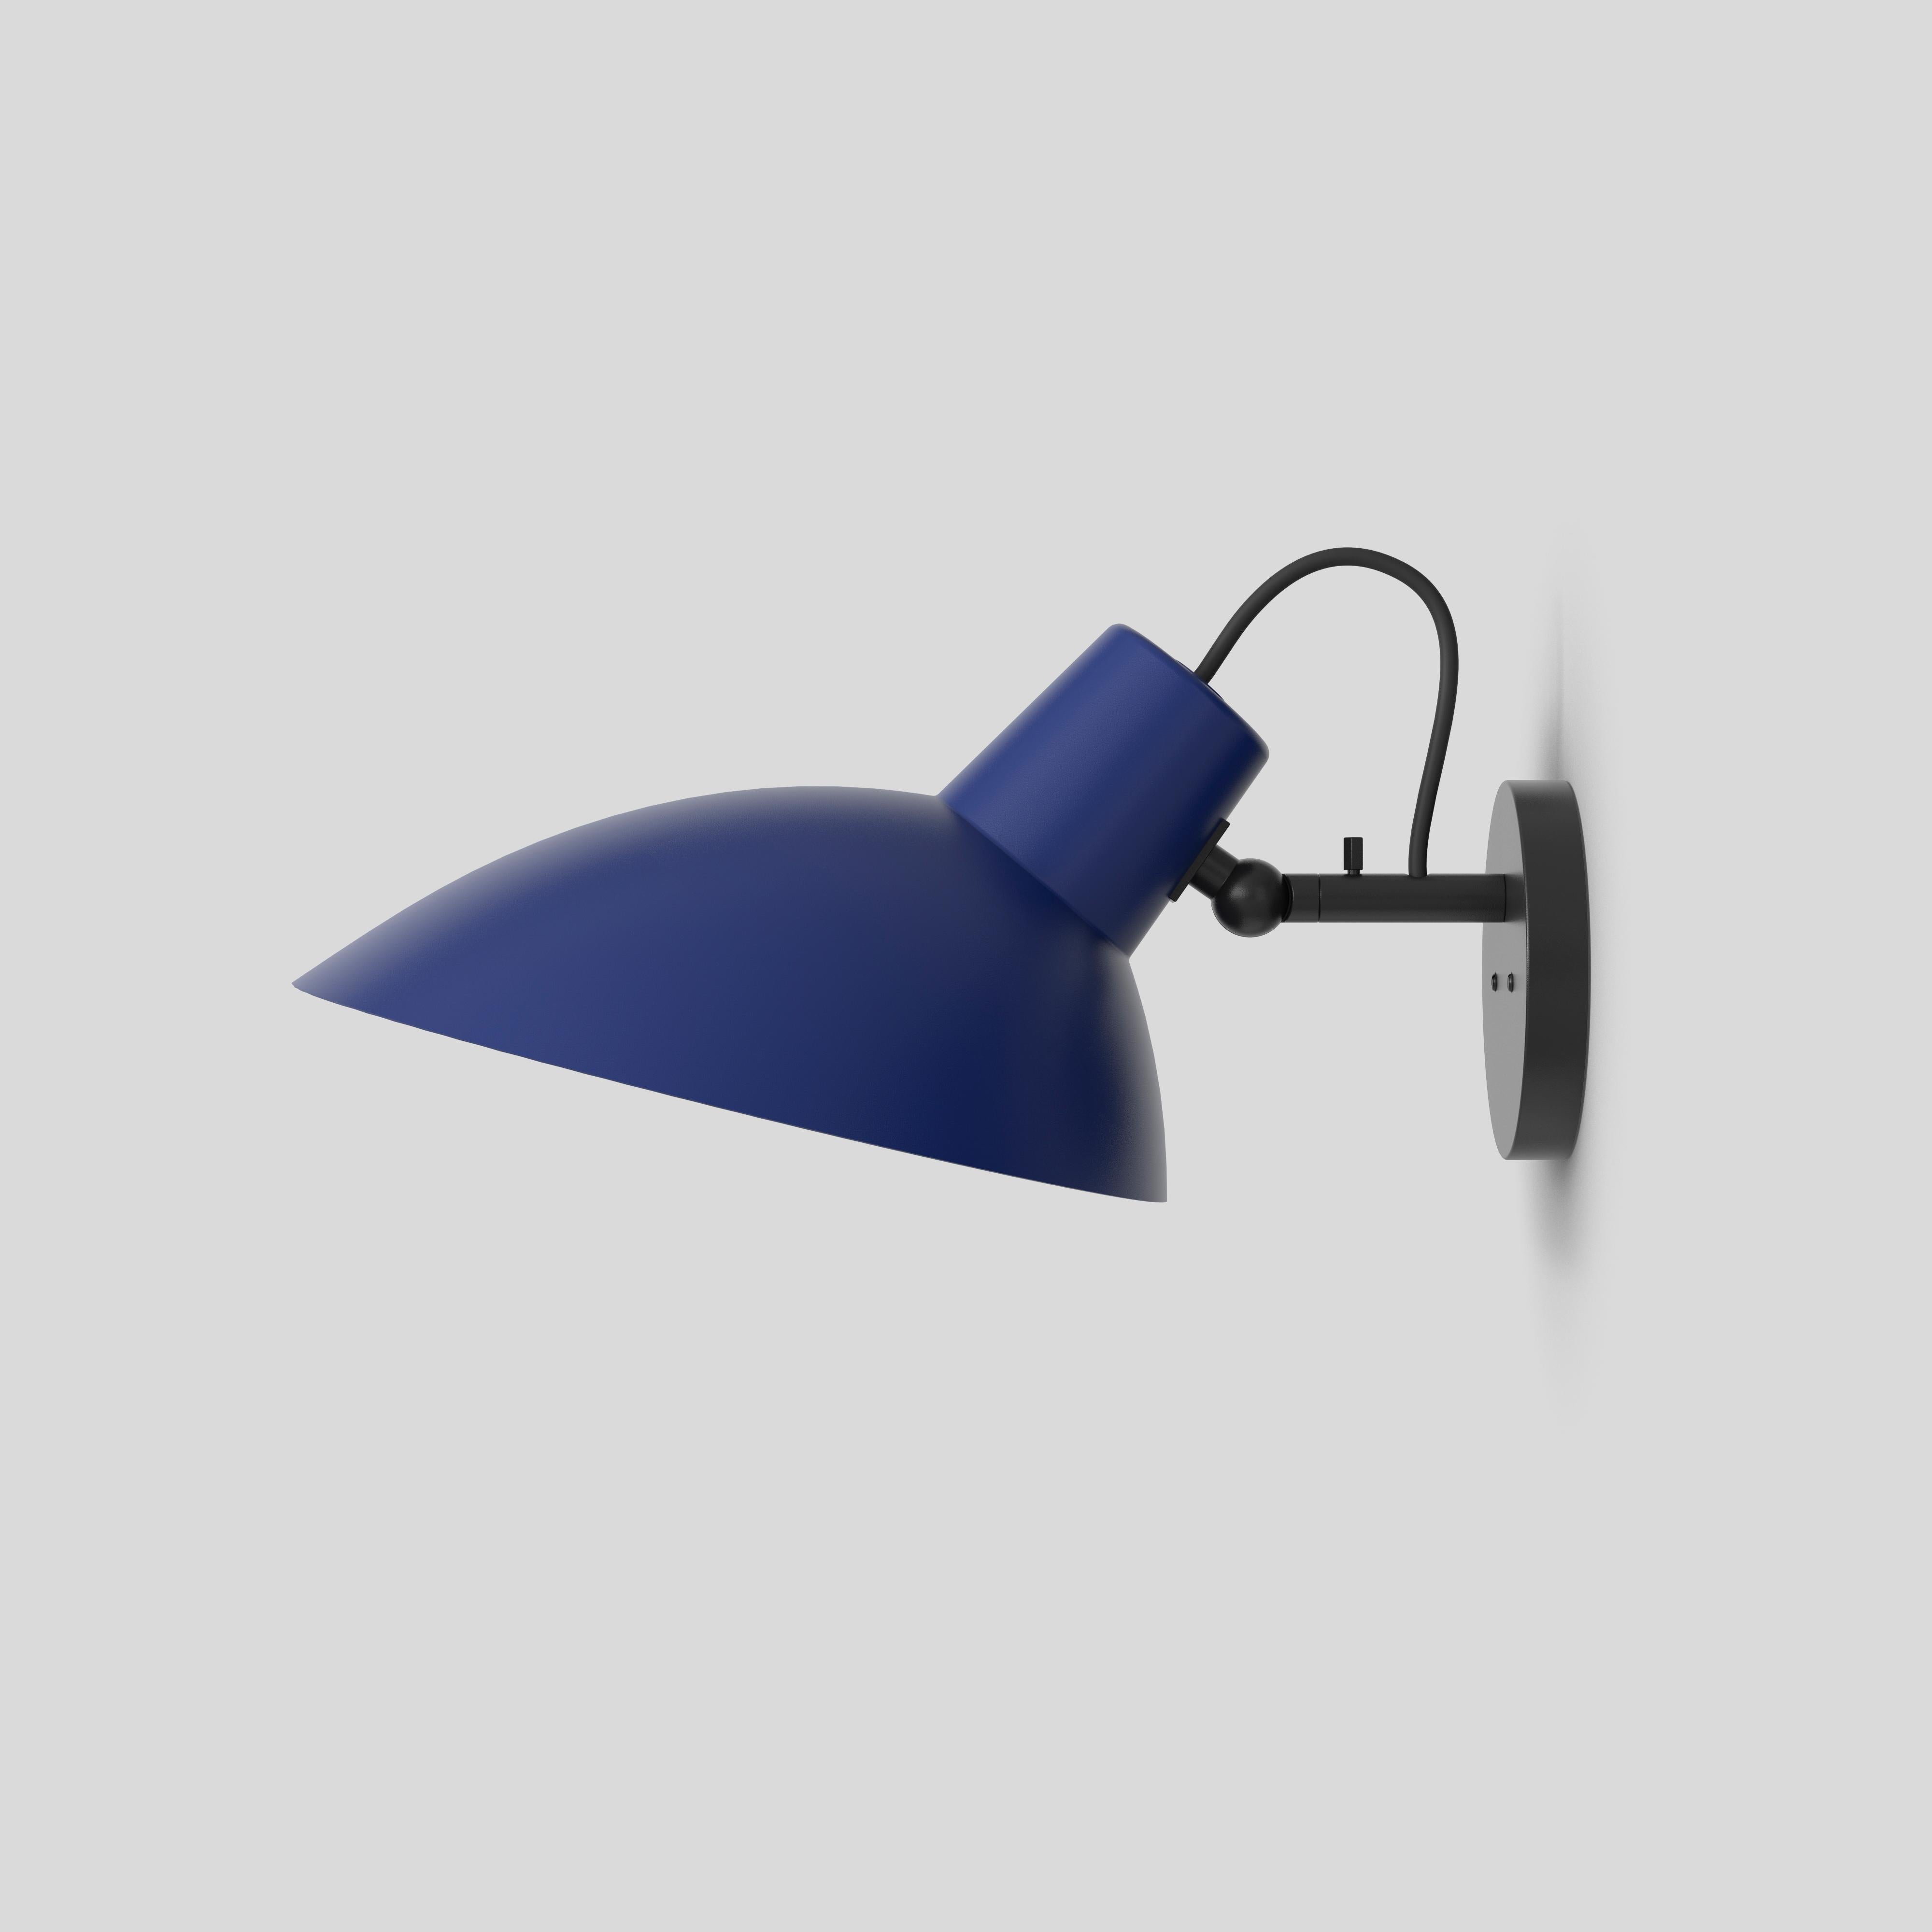 VV Cinquanta wall lamp
Design by Vittoriano Viganò
This version is with blue lacquered reflector and black mount.

The VV Cinquanta features an elegant and versatile posable direct light source that can swivel and tilt. The wall model is mounted